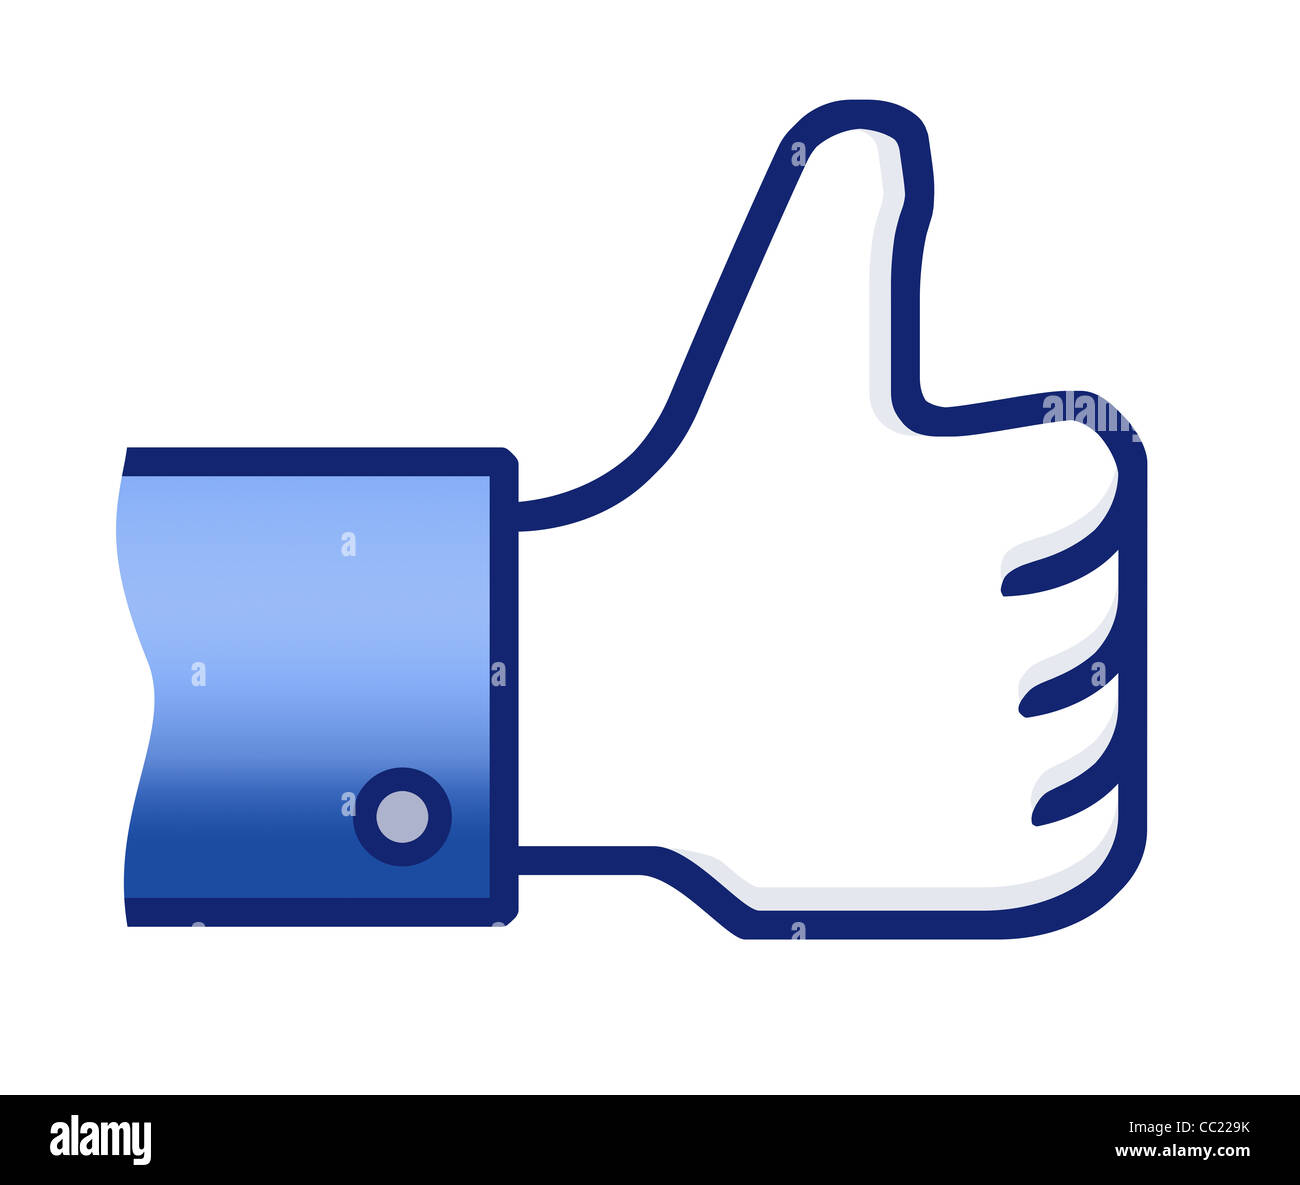 Illustration of the facebook thumb up hand sign. Isolated on white. Stock Photo